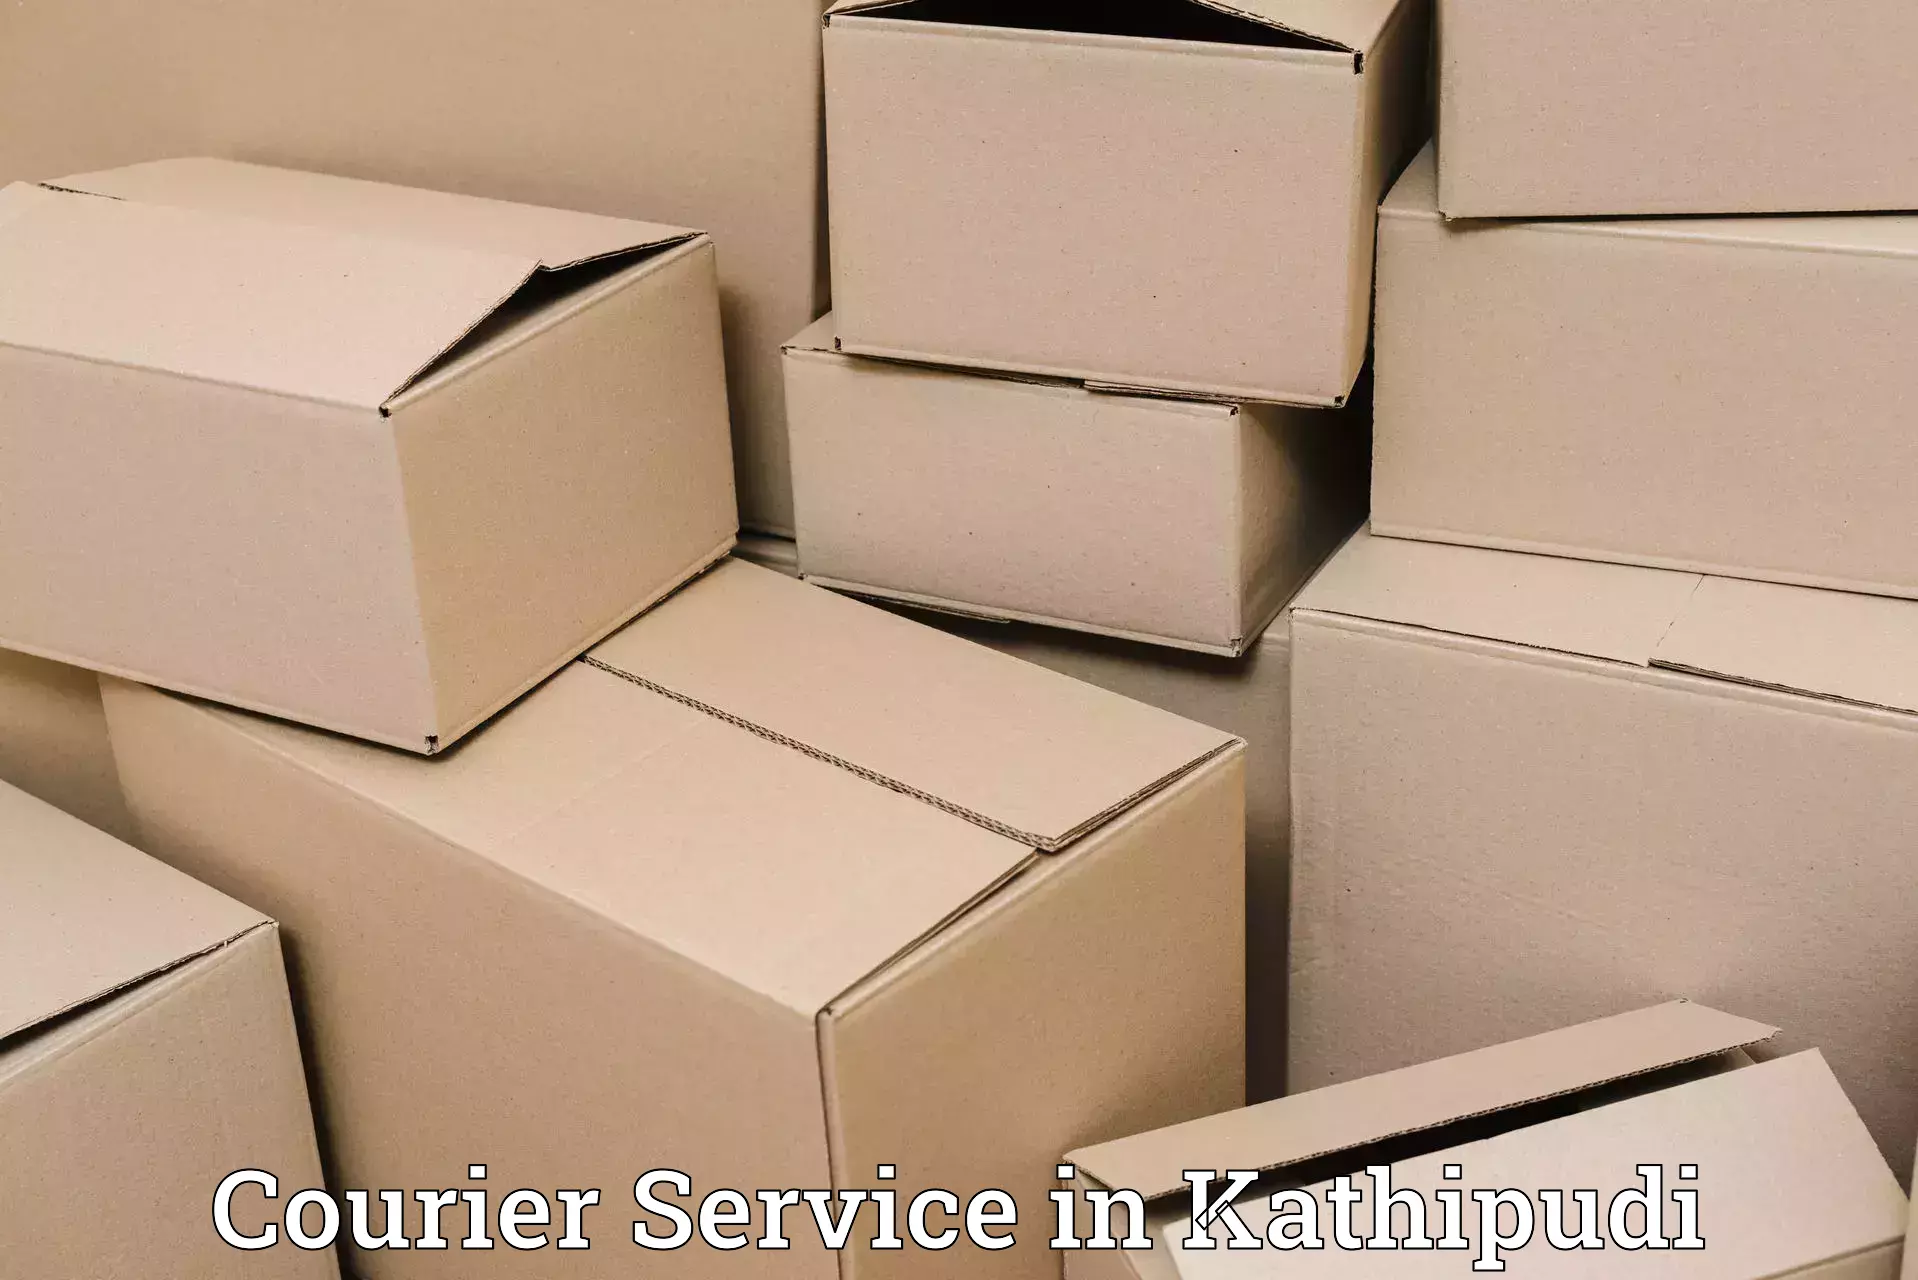 Customized shipping options in Kathipudi